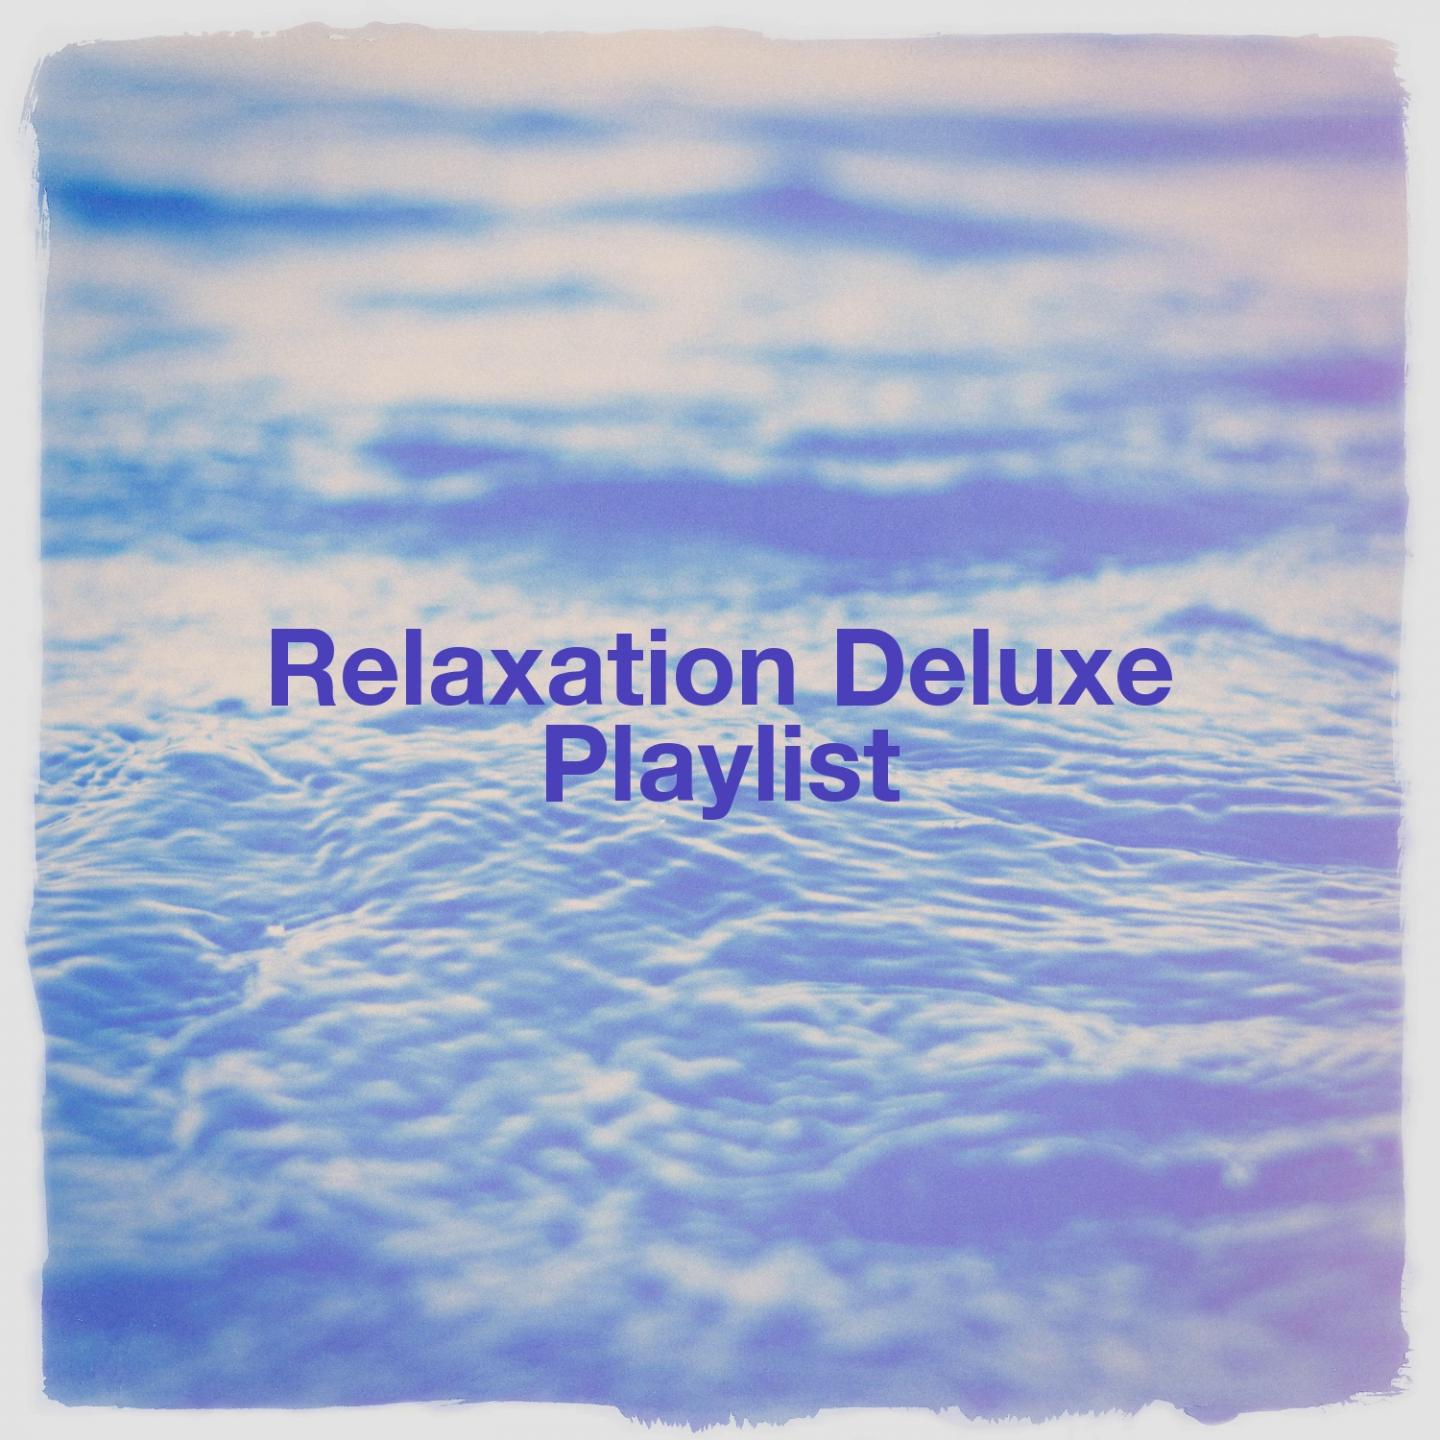 Relaxation deluxe playlist